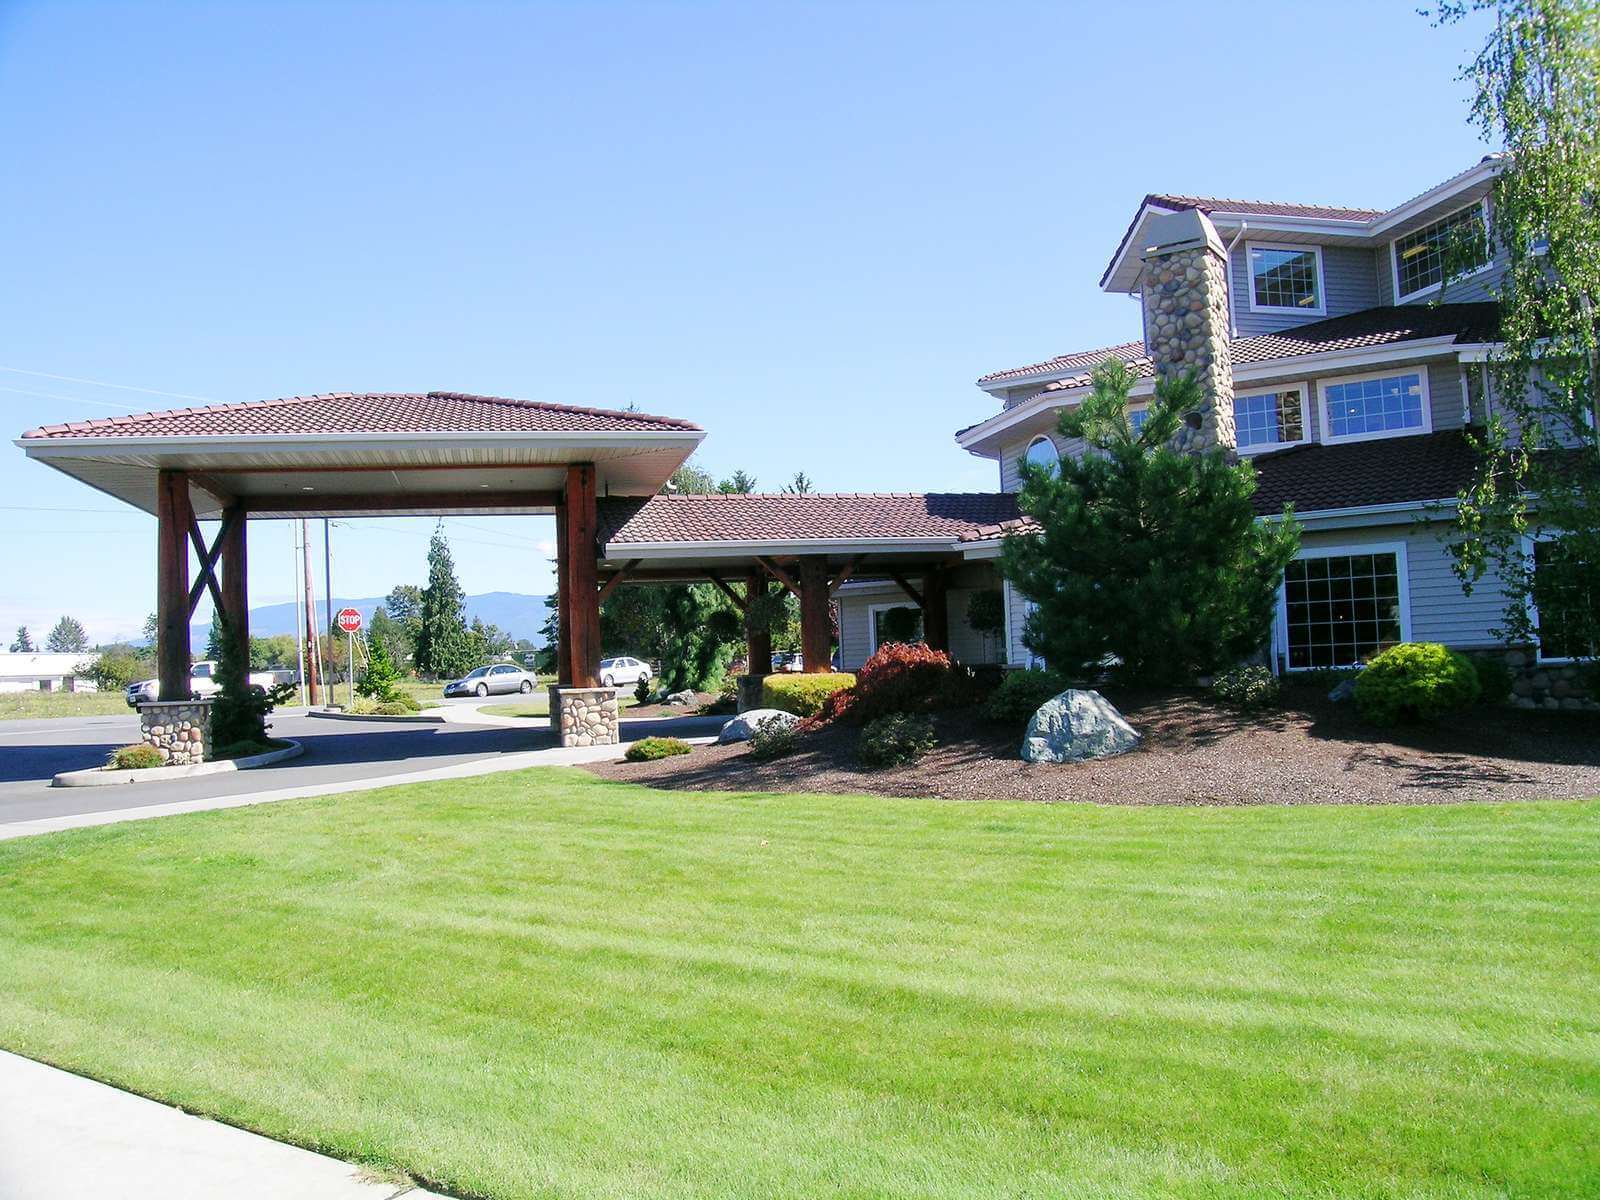 Crystal Gardens Assisted Living House #2